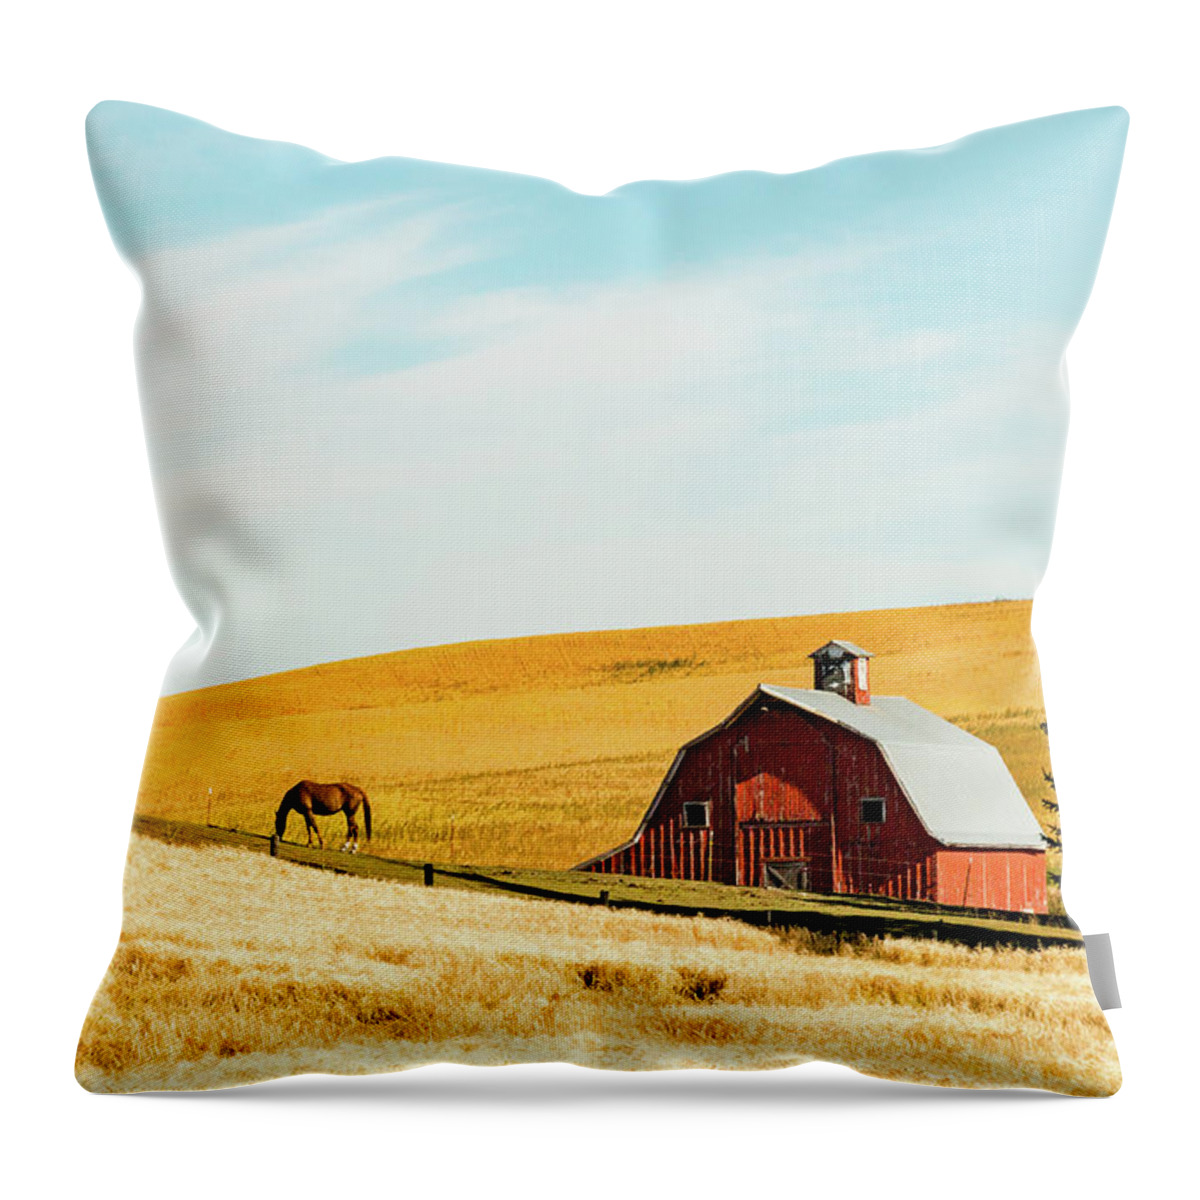 Landscapes Throw Pillow featuring the photograph Palouse 16 by Claude Dalley